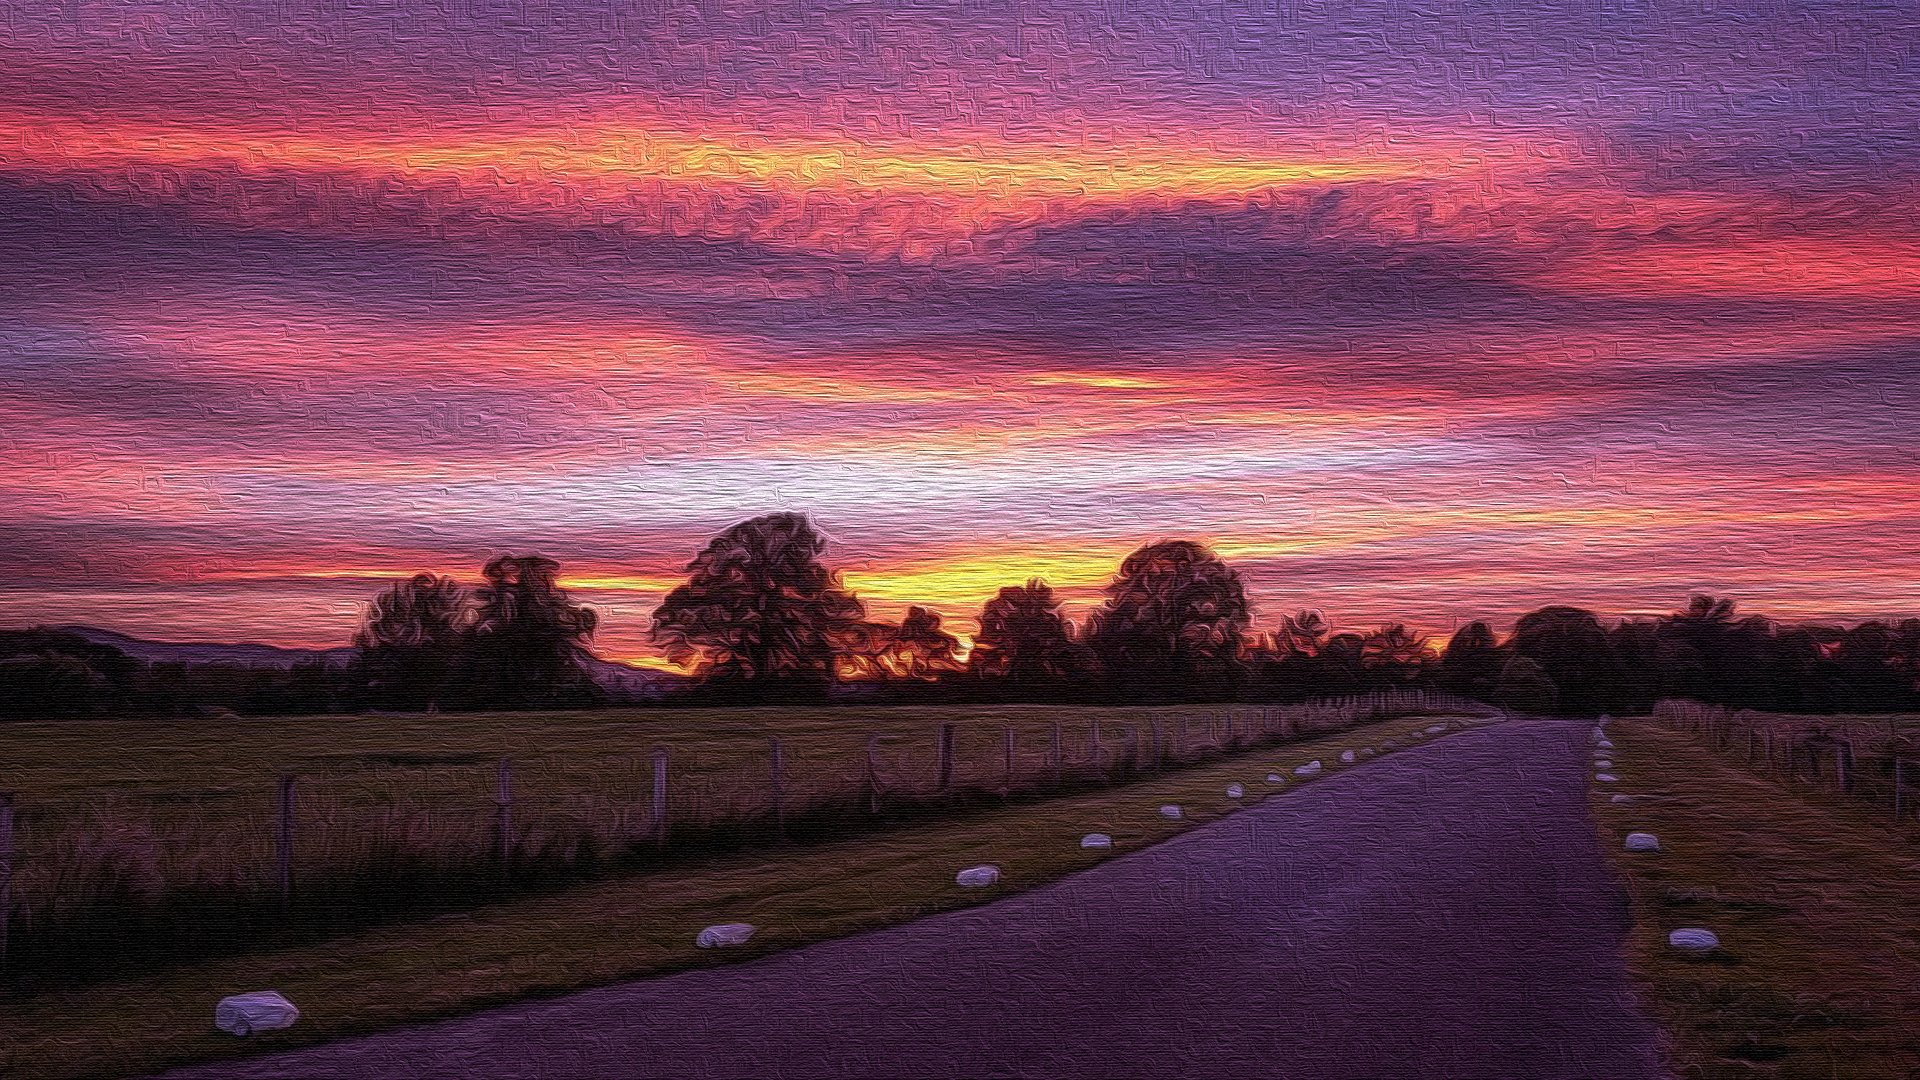 3840x2160 Country Road Sunset - Oil on Canvas Wallpaper Background Image. 